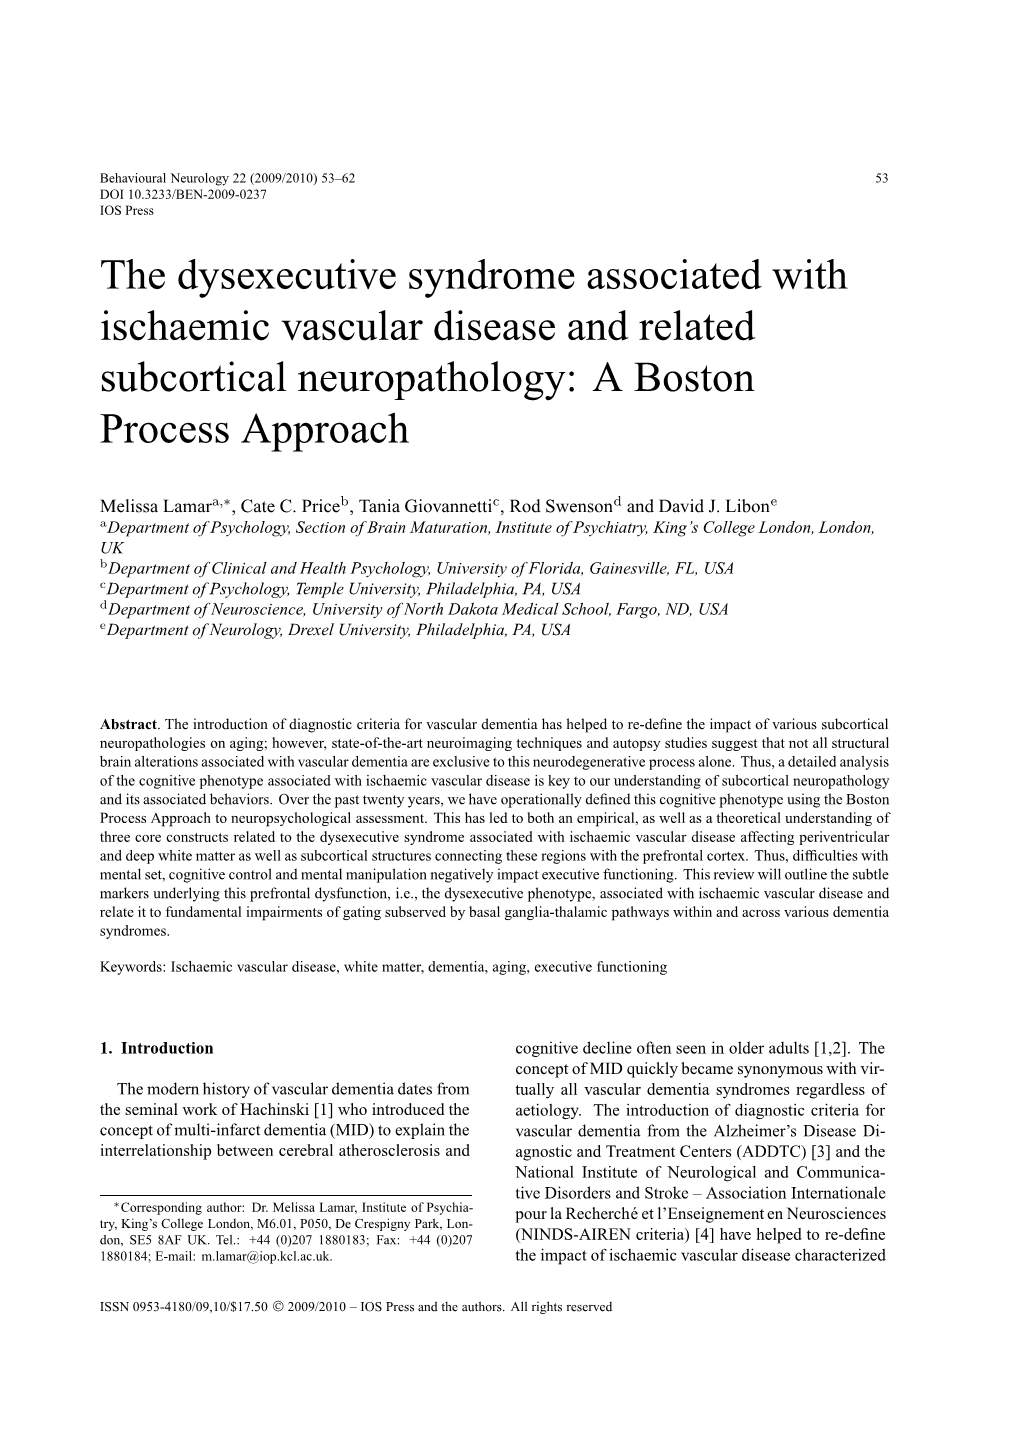 The Dysexecutive Syndrome Associated with Ischaemic Vascular Disease and Related Subcortical Neuropathology: a Boston Process Approach